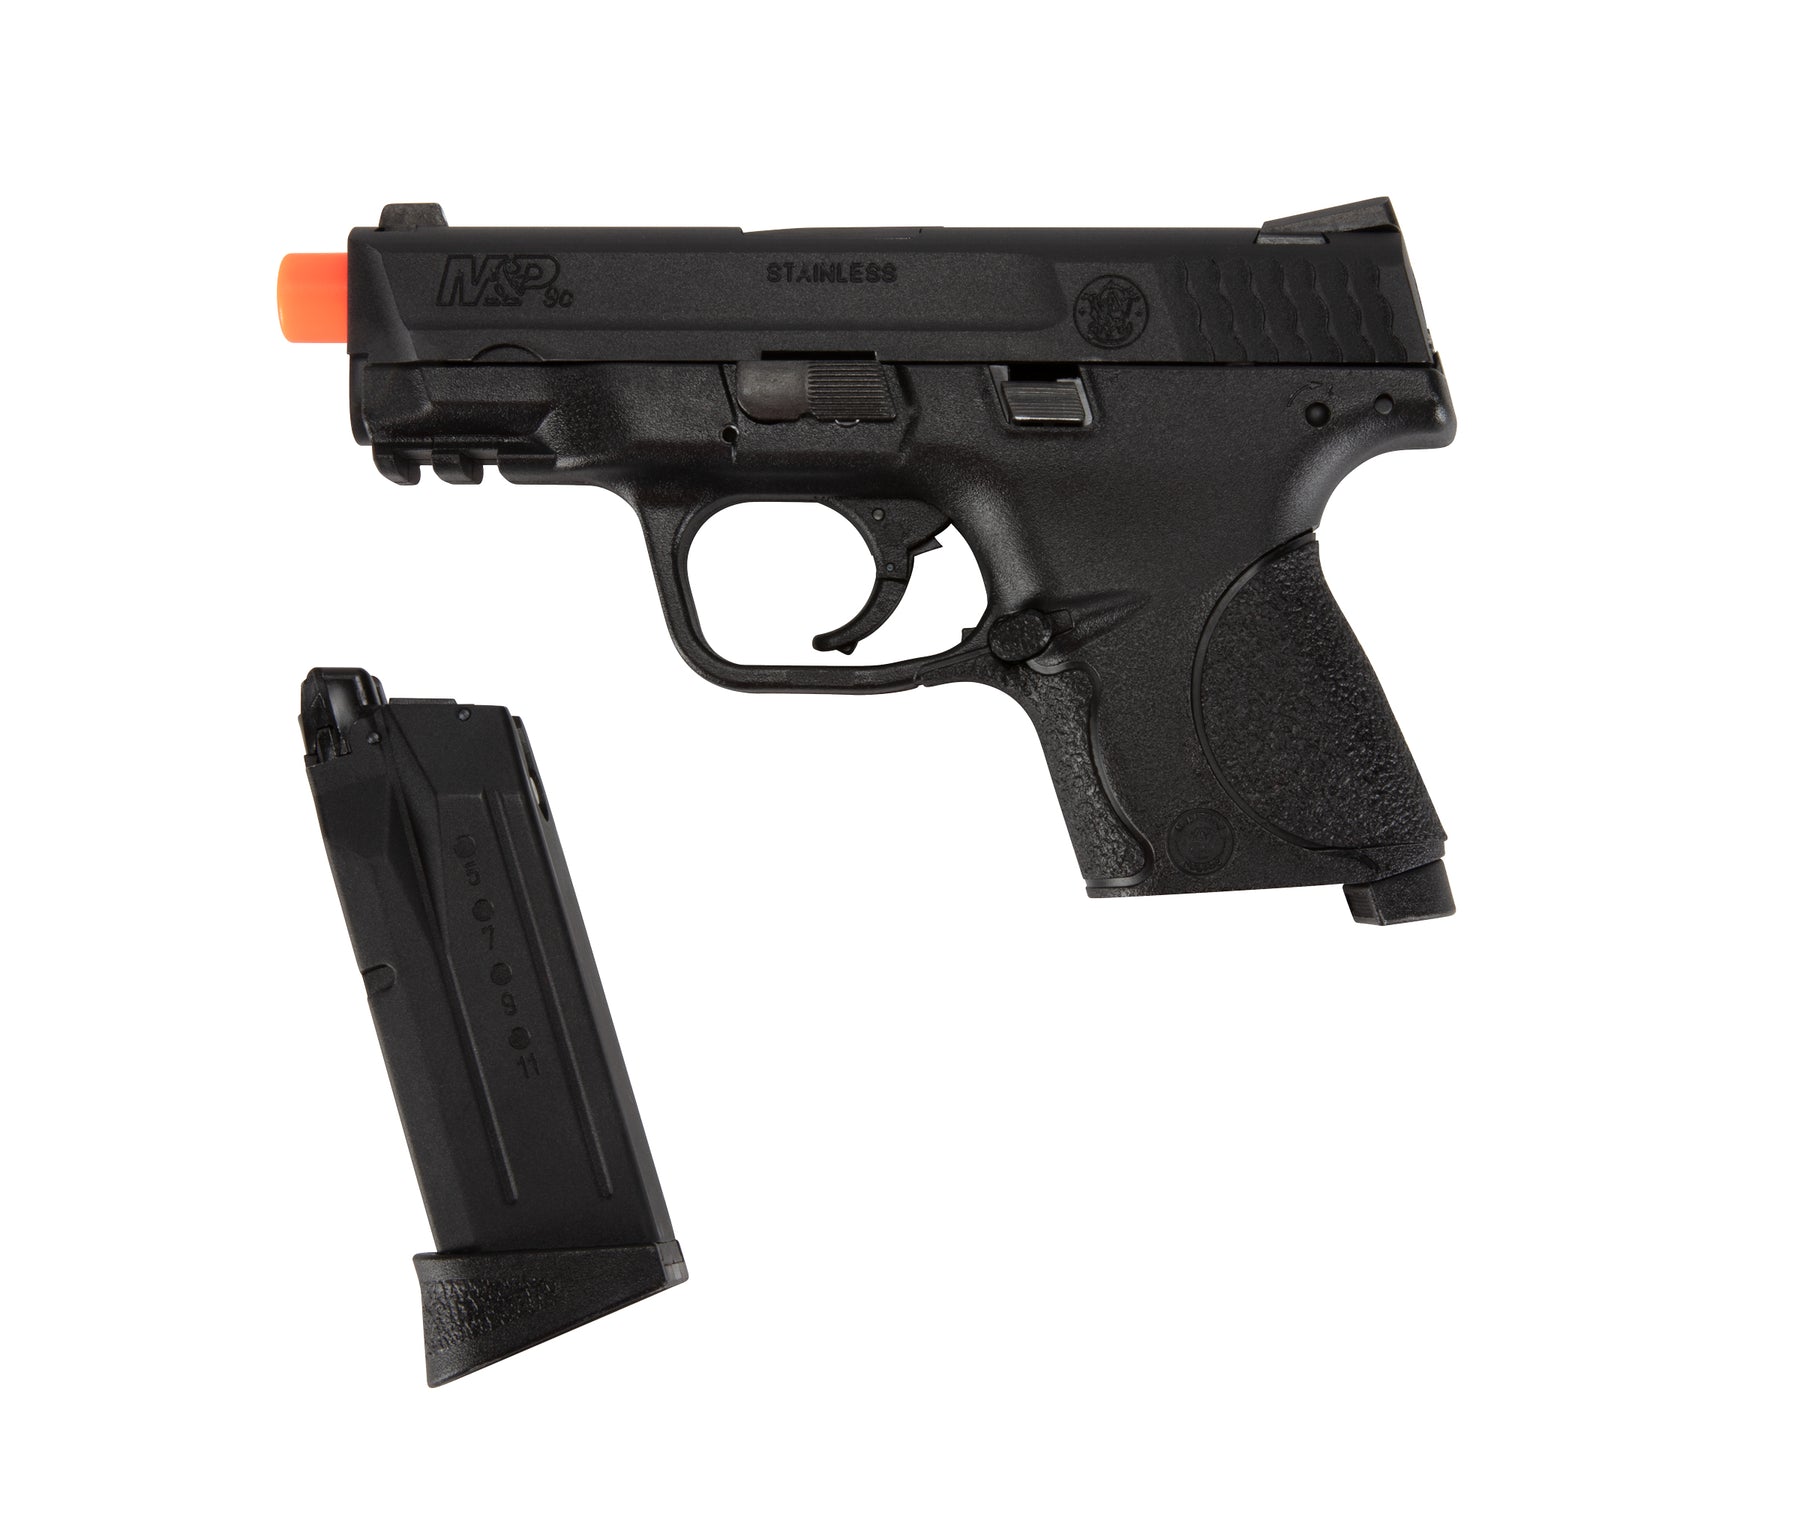 Gas & CO2 Airsoft Pistols, Buy Airsoft Guns Online